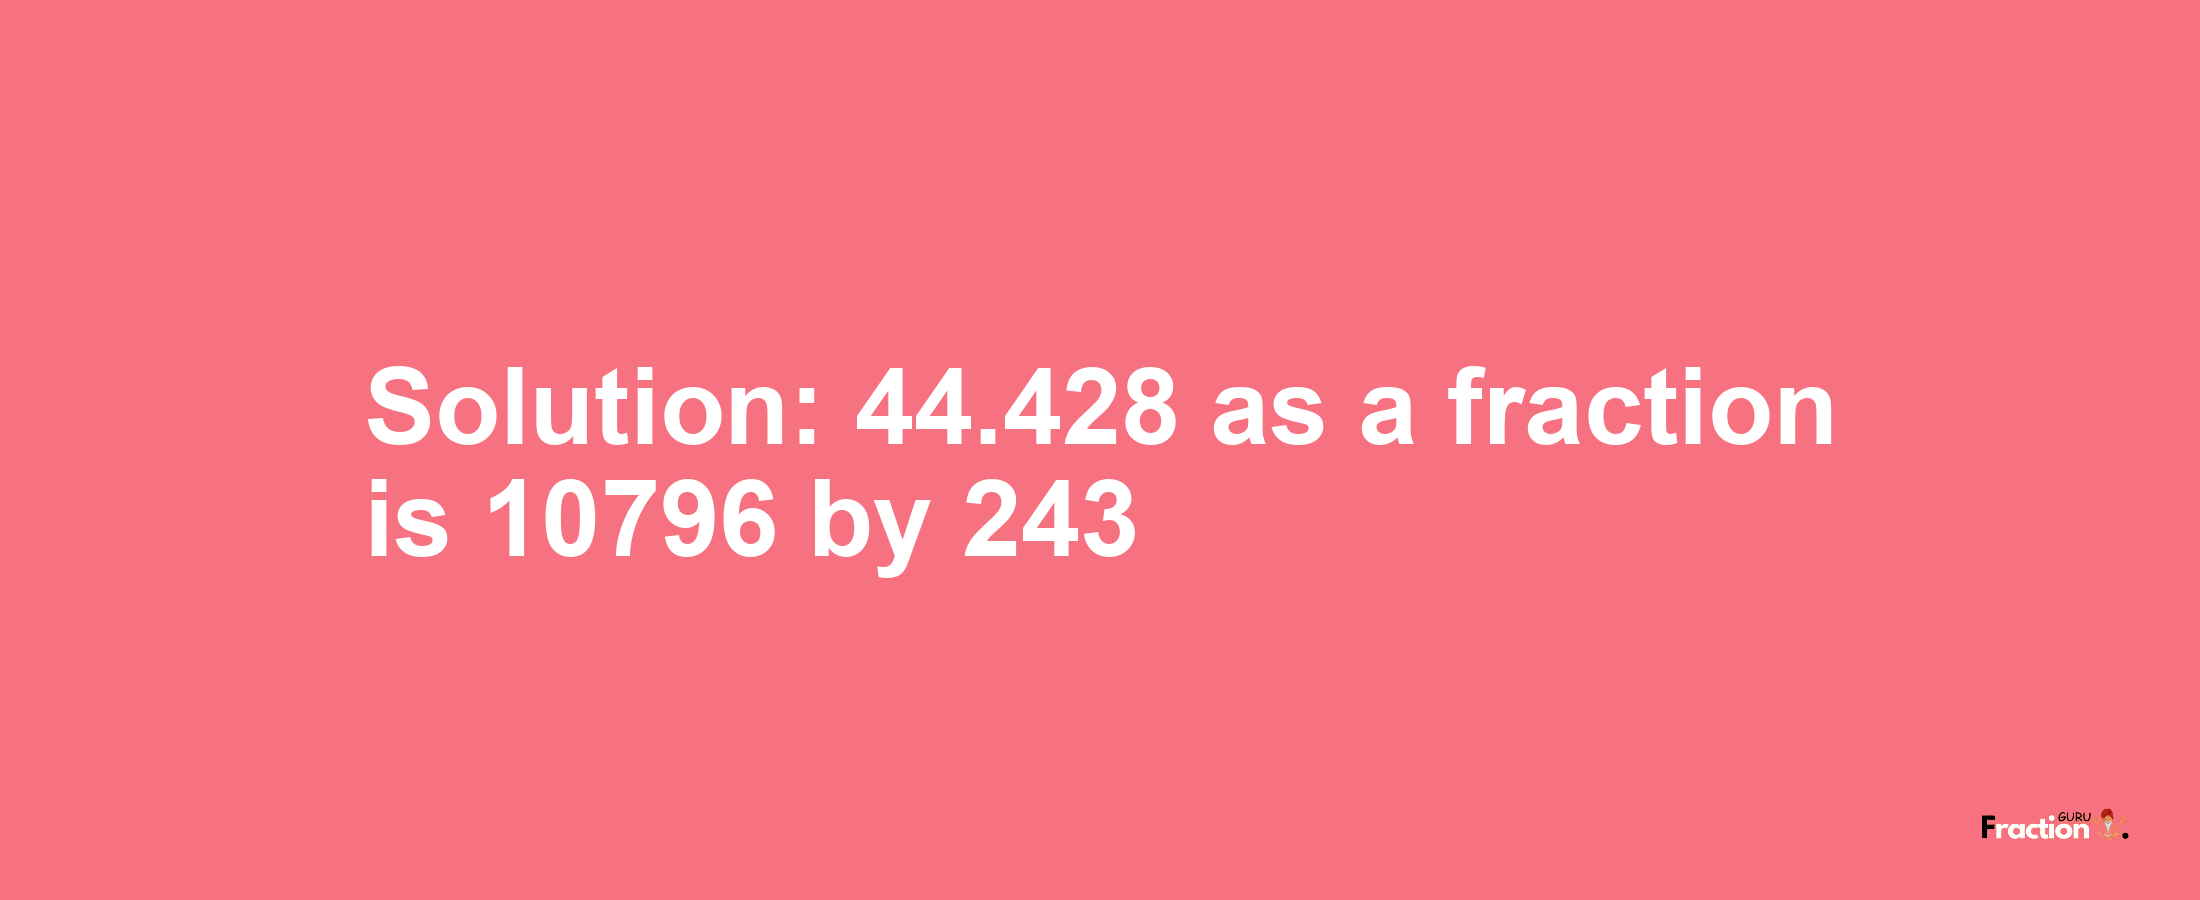 Solution:44.428 as a fraction is 10796/243